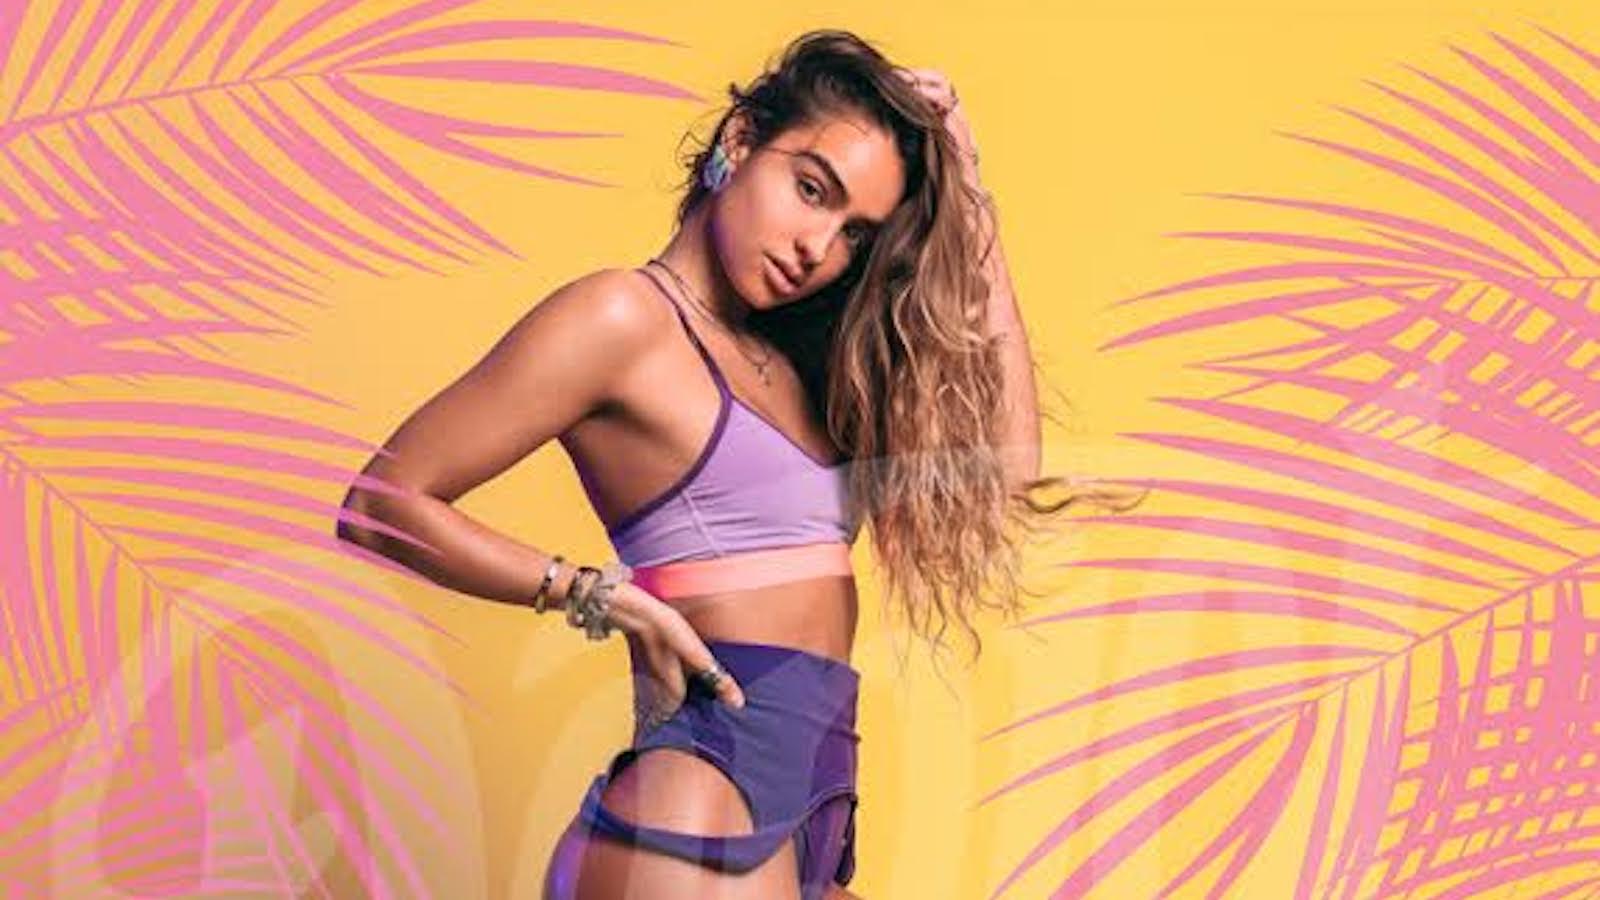 Ray nude sommer sommer ray